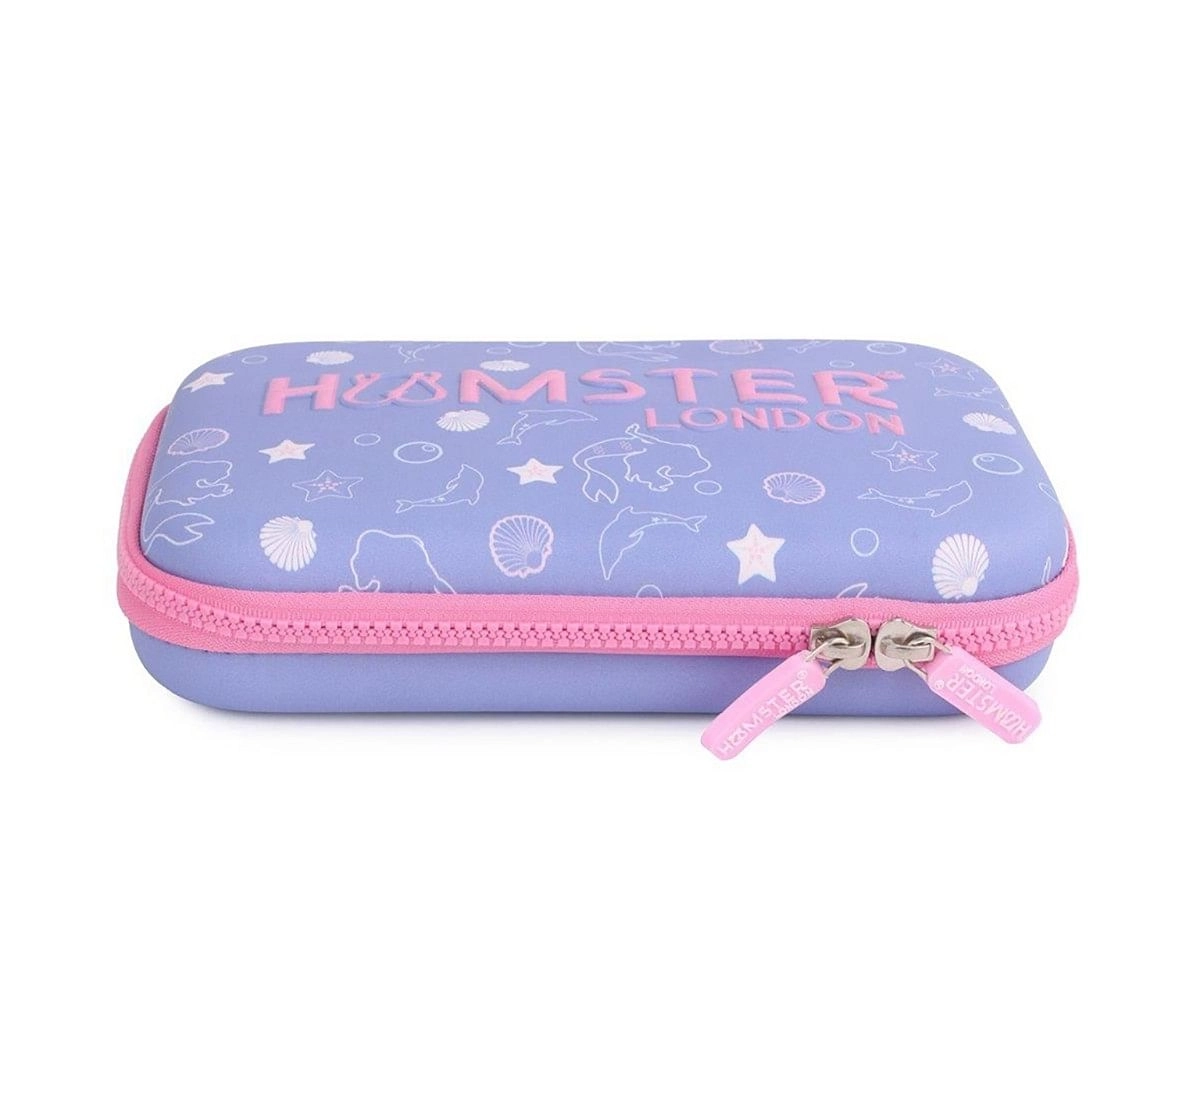 Hamster London Sequence Mermaid Stationery Hardcase for age 3Y+ (Pink)